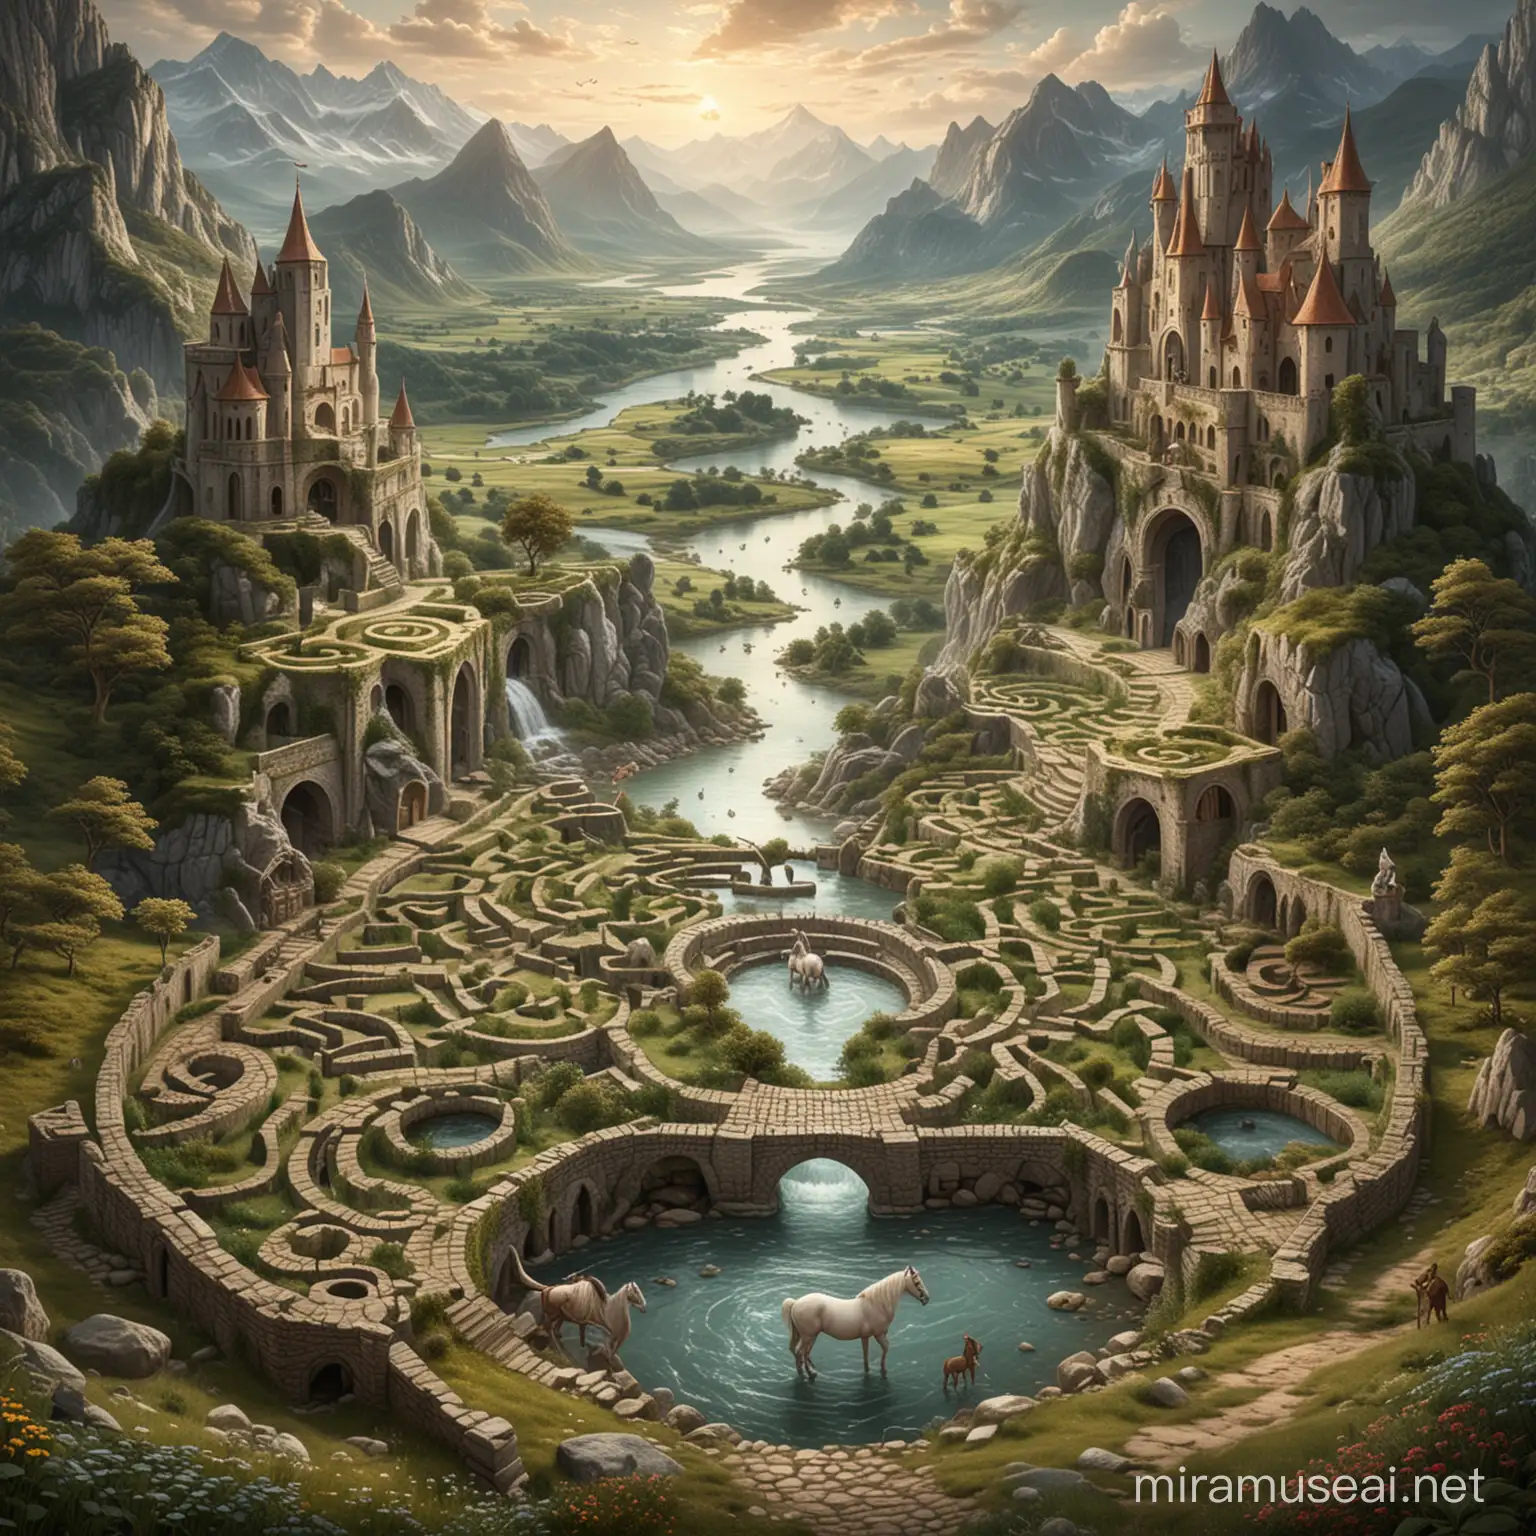 a labyrinth in the middle of a medieval landscape with mountains and a river, guarded by a unicorn, a satyr, a dragon and a centaur